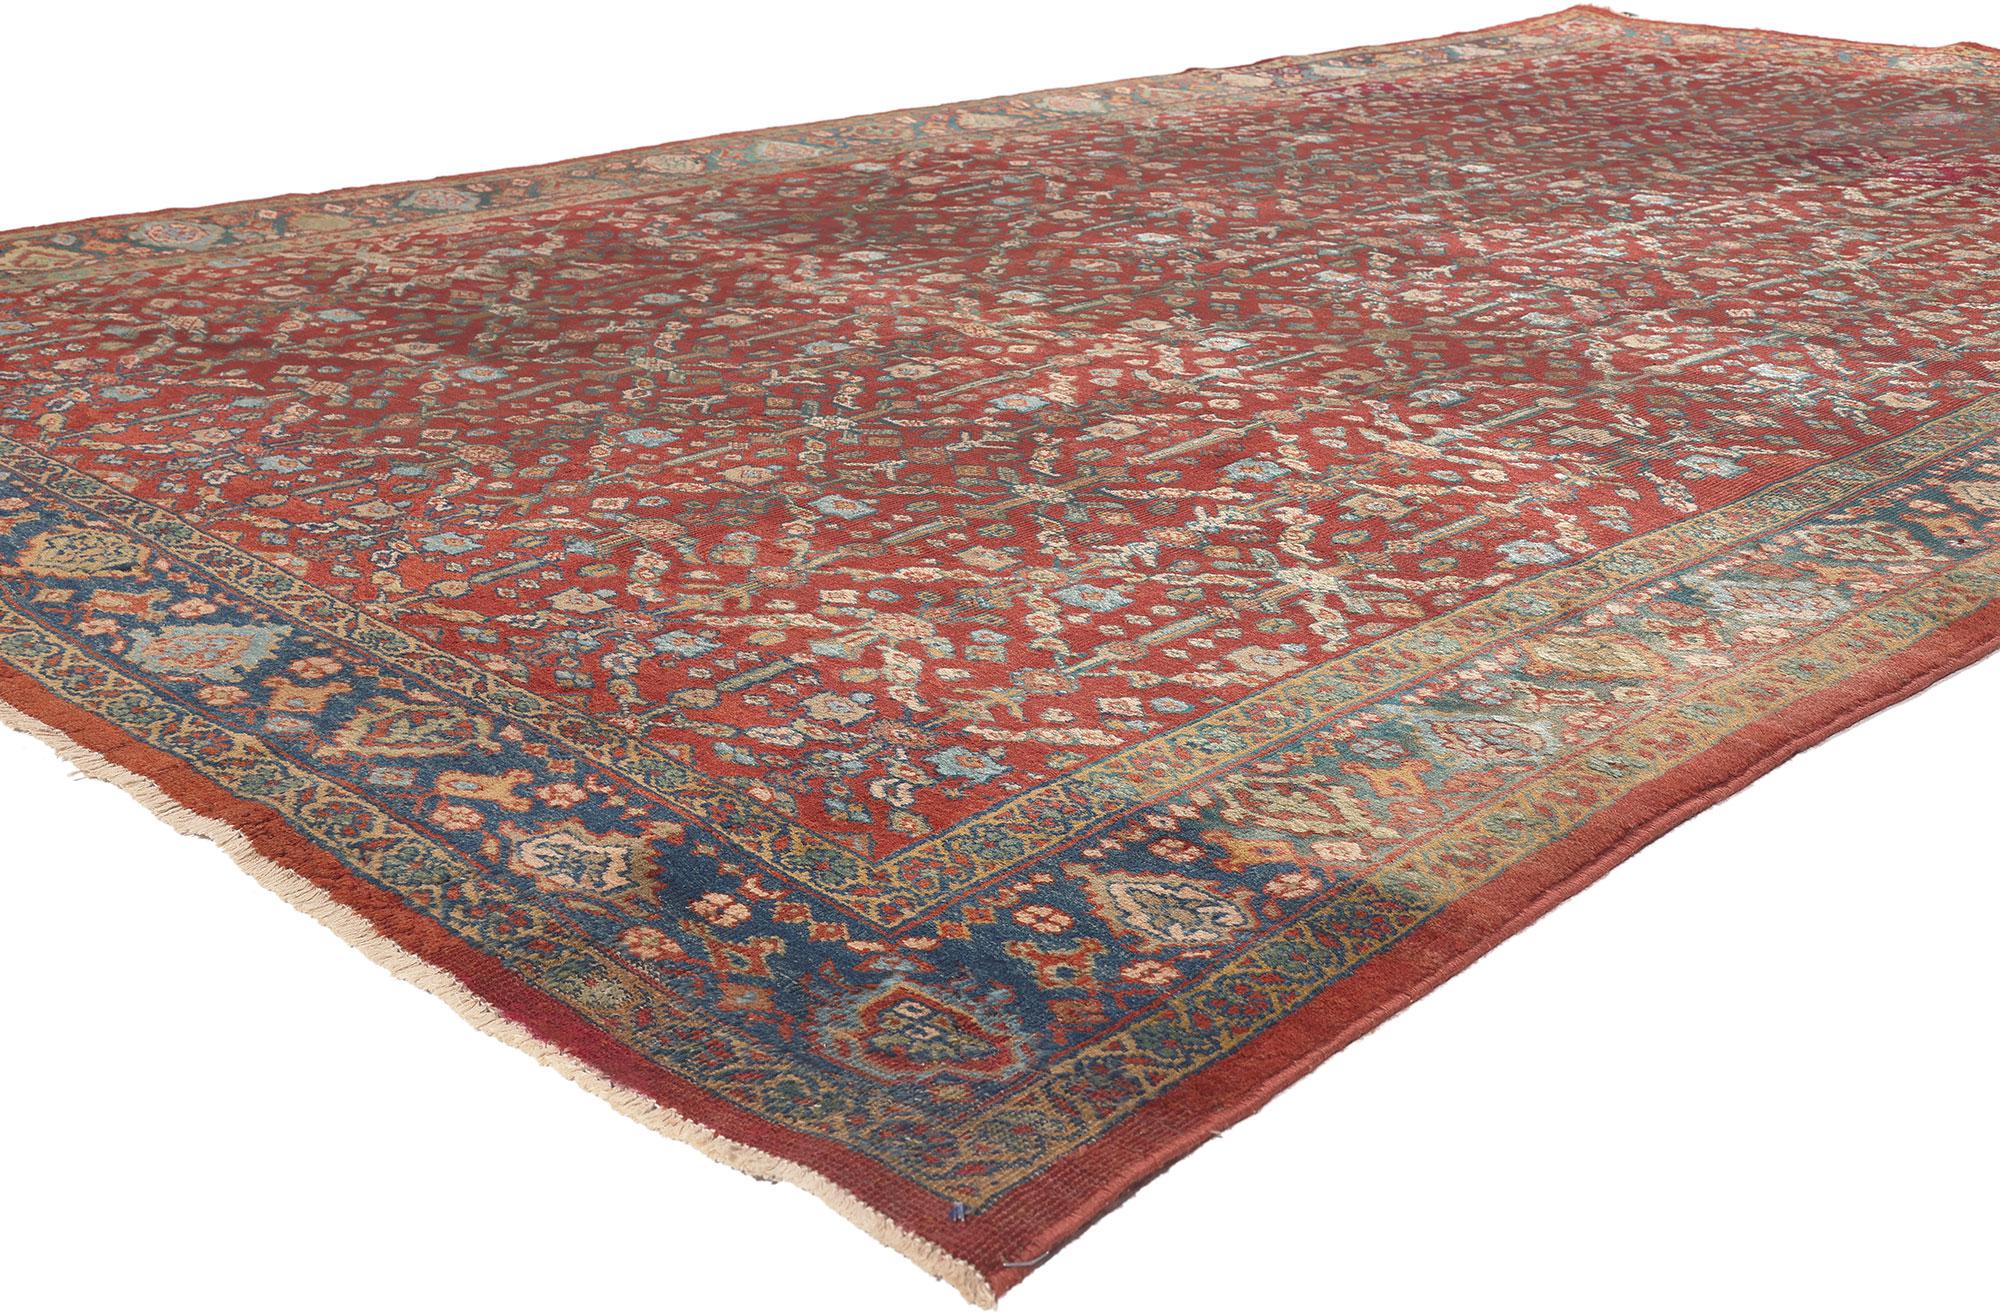 72497 Antique-Worn Persian Mahal Rug, 07'00 X 11'00.
Relaxed refinement meets rustic sensibility in this hand knotted wool antique-worn Persian Mahal rug. The Guli Henna lattice design and traditional color palette woven into this piece work